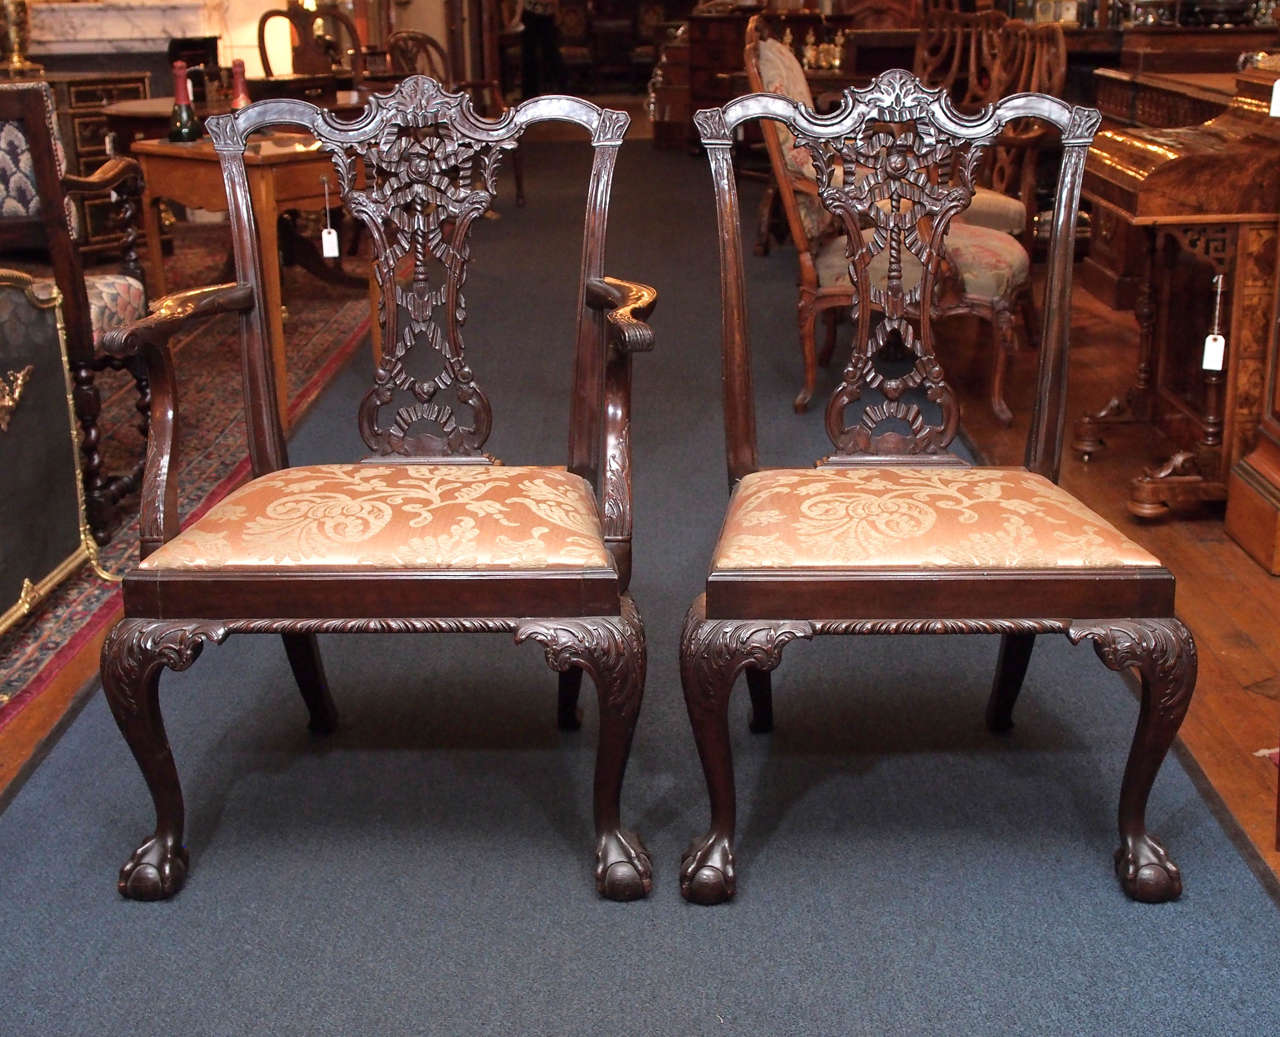 These are fine examples of English furniture design, with the interlaced ribboning and graceful cabriole legs.